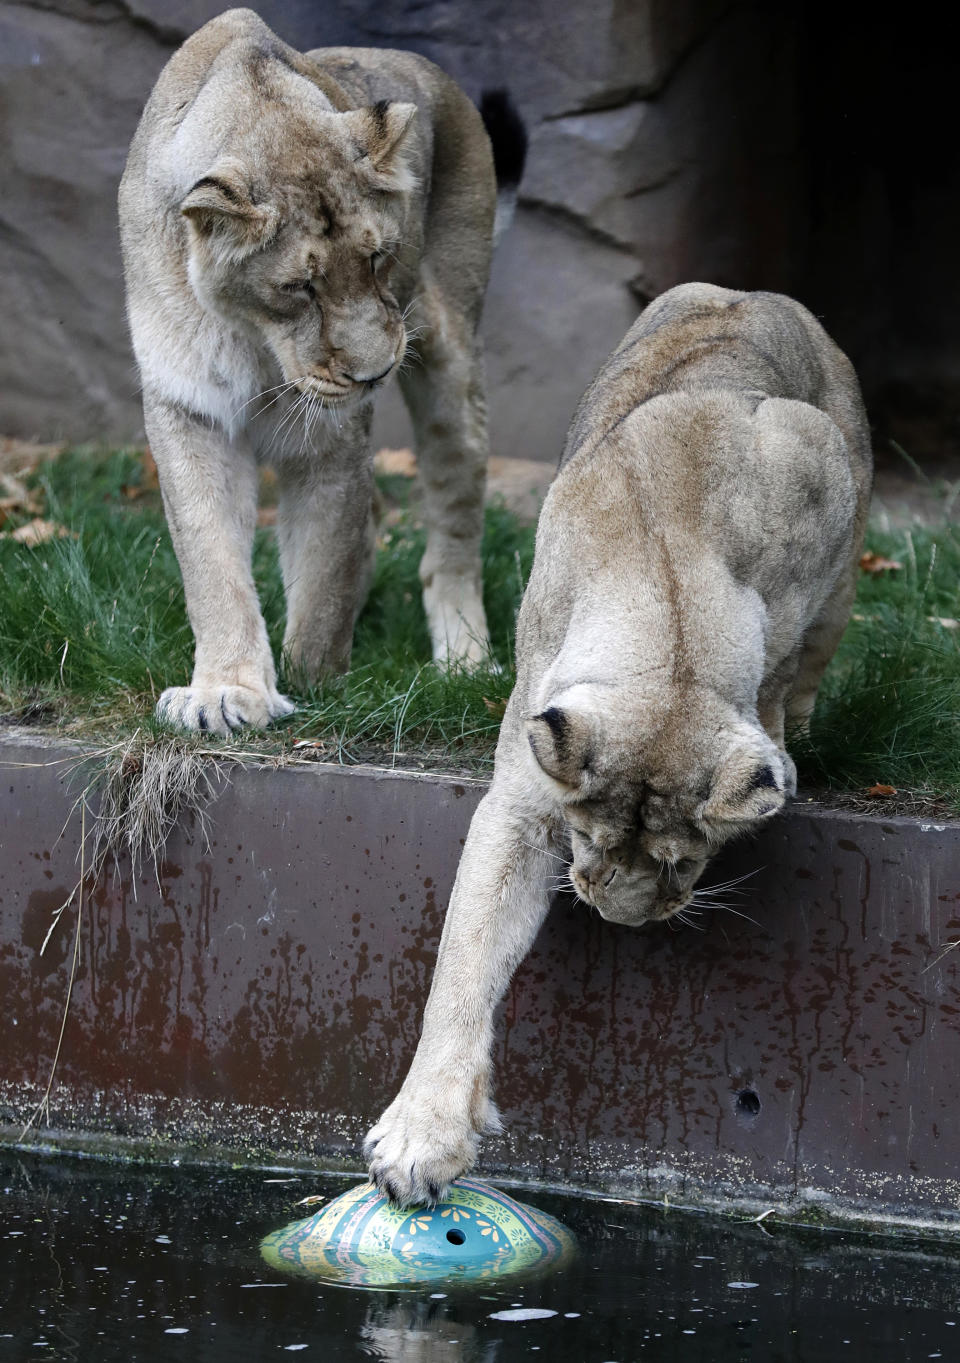 Two of London Zoo's lionesses, sisters Heidi, Indi or Rubi, watch a ball in the water, a day ahead of World Lion Day in London, Thursday, Aug. 9, 2018. The pride will be celebrating conservation success as Asiatic lions numbers continue to increase. (AP Photo/Frank Augstein)